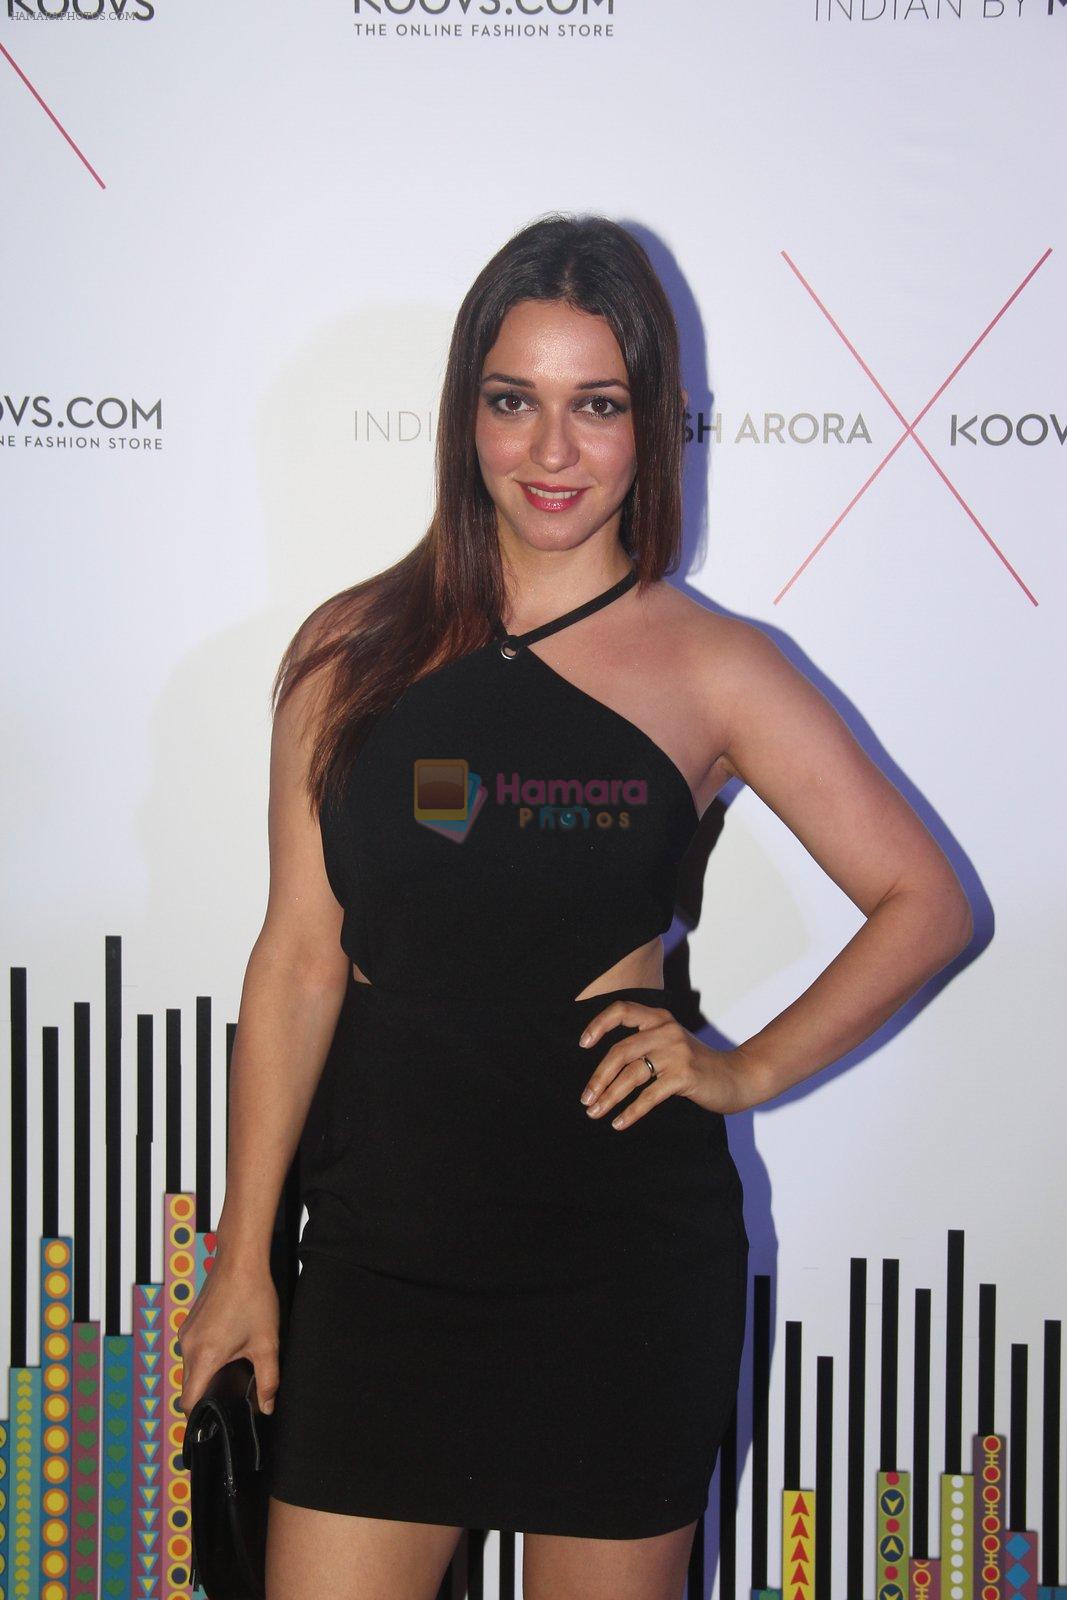 Nauheed Cyrusi at Indian by Manish Arora for Koovs.com on 1st April 2016